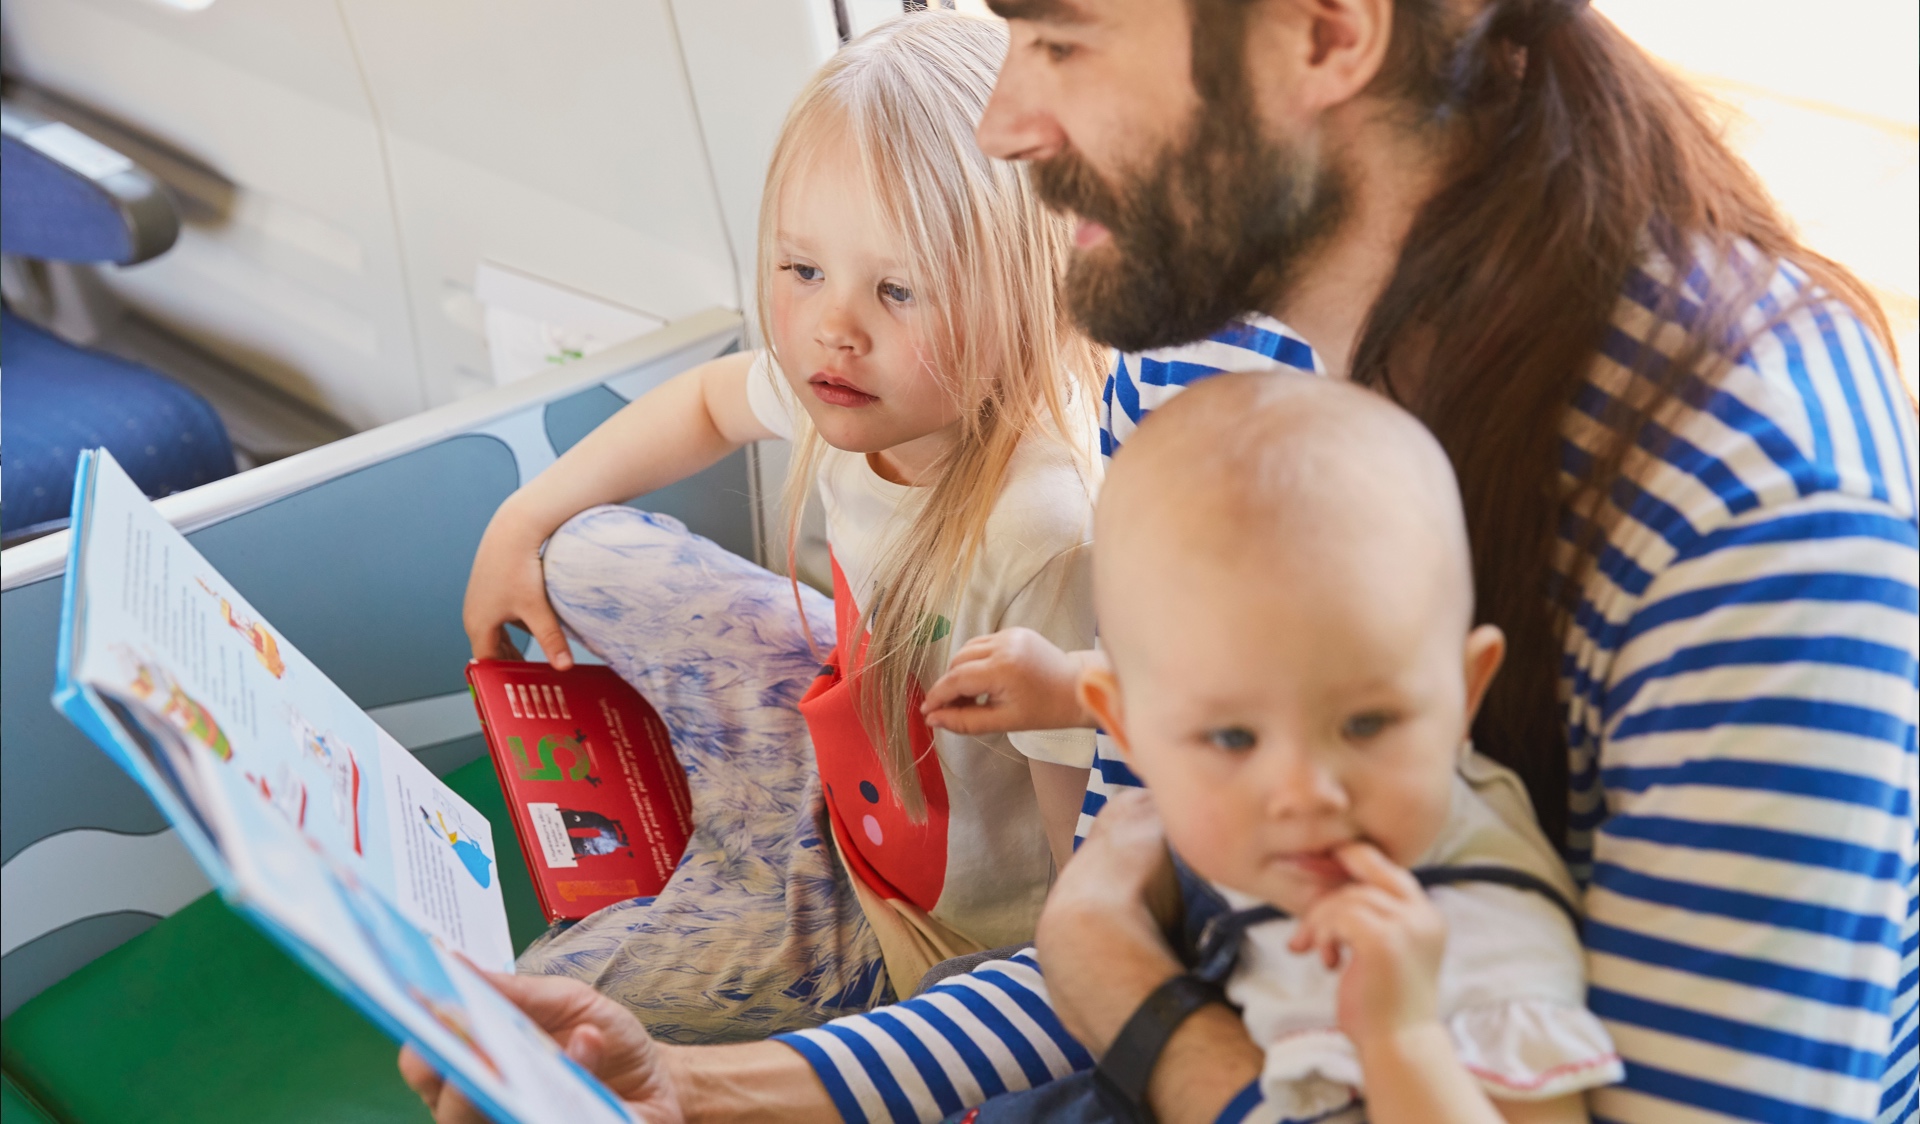 A father is reading a book to two children at the play area on a train.